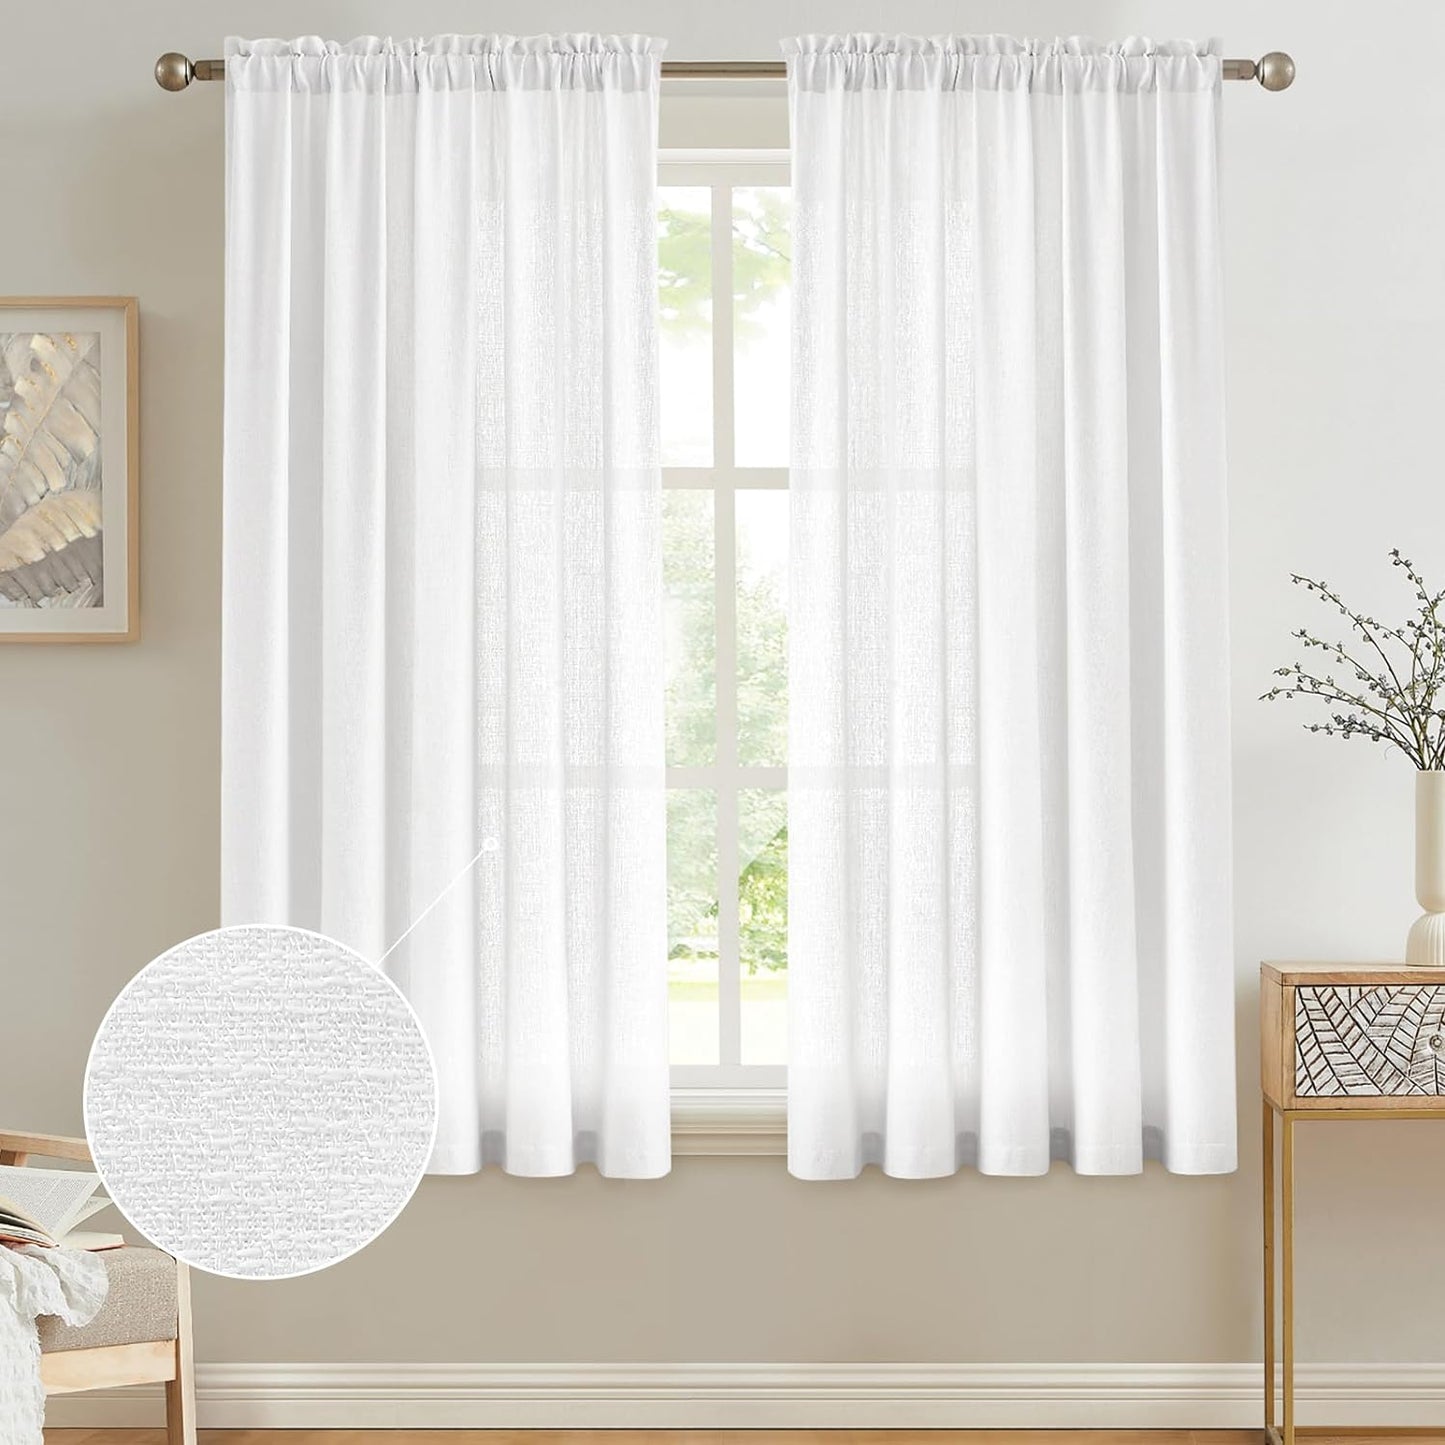 Anpark White Semi Sheer Curtains Linen Rod Pocket Curtains Tiebacks Included Semi Sheers, Privacy & Serenity for Bedroom, Soft Light for Relaxation - 52" W X 84" L, 2 Panels  Anpark White 52X63 Inch 